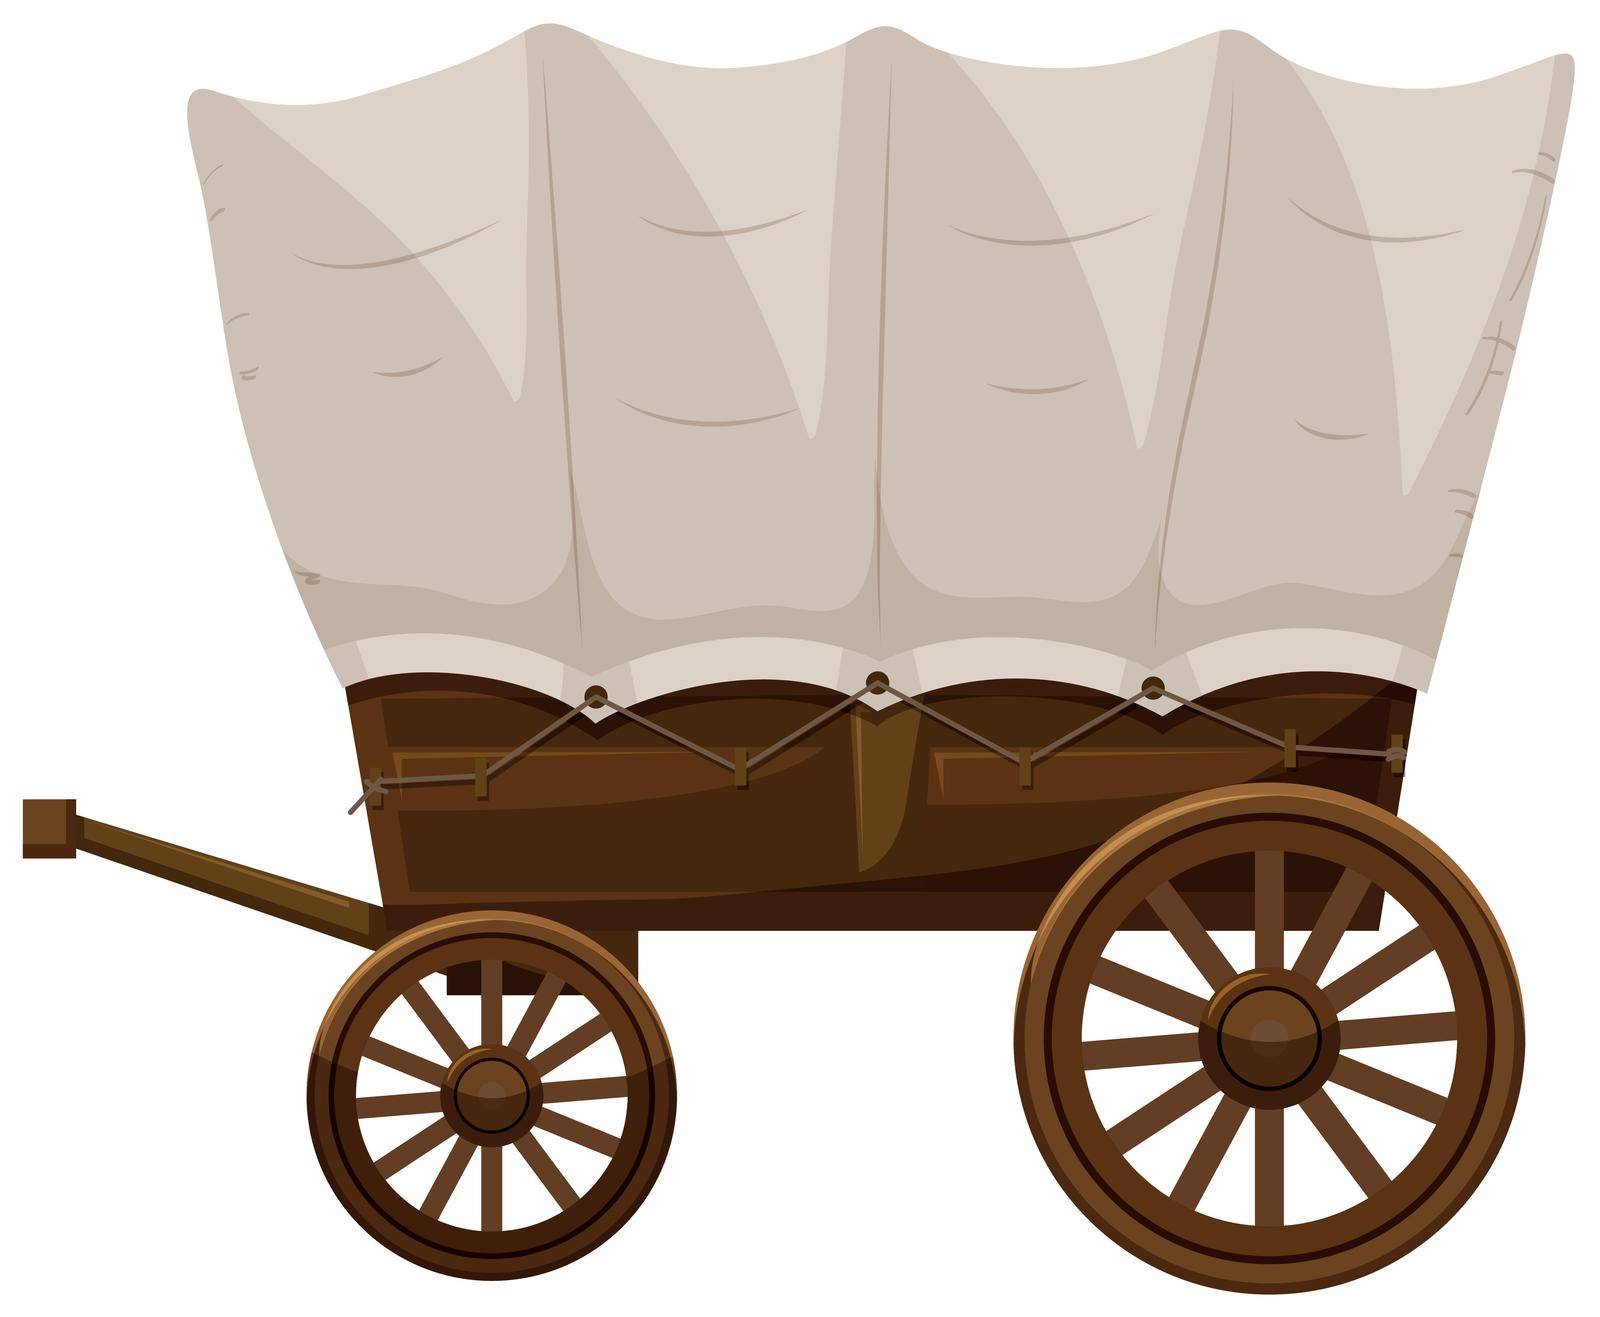 Wagon with wooden wheels illustration